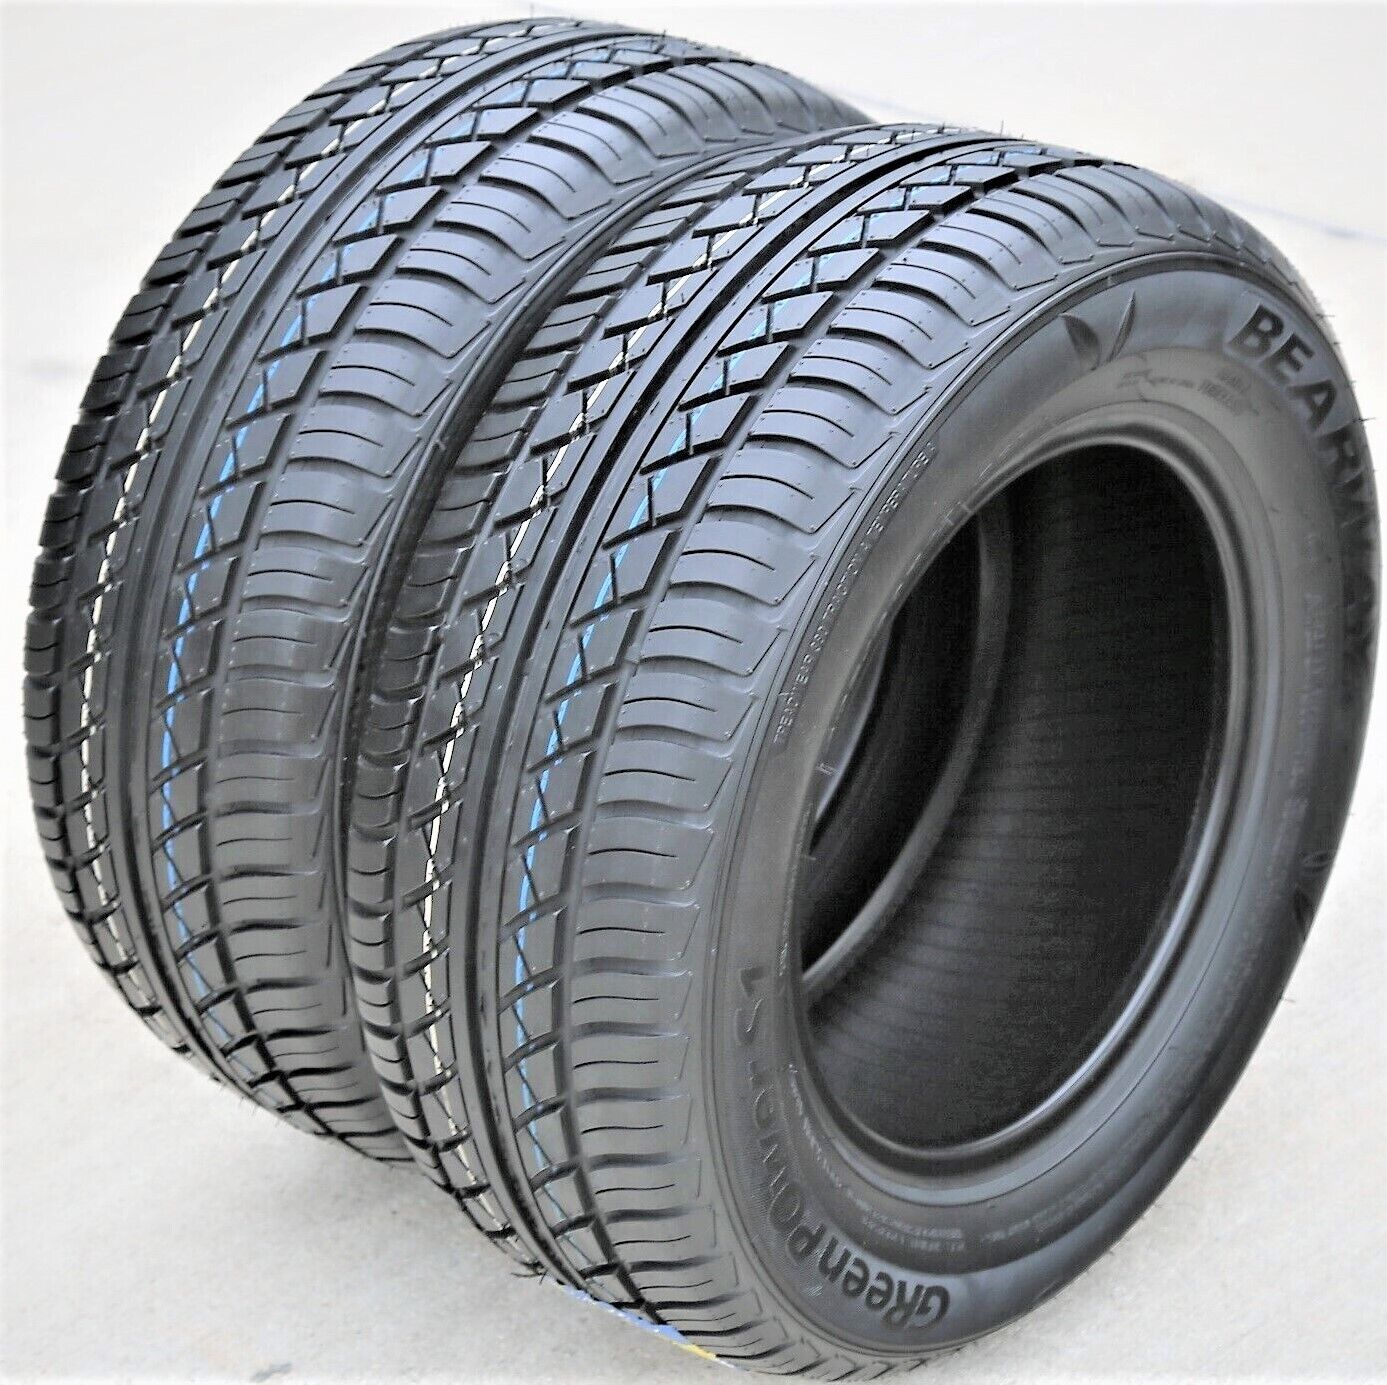 2 Tires Bearway Green Power S1 205/60R13 86T